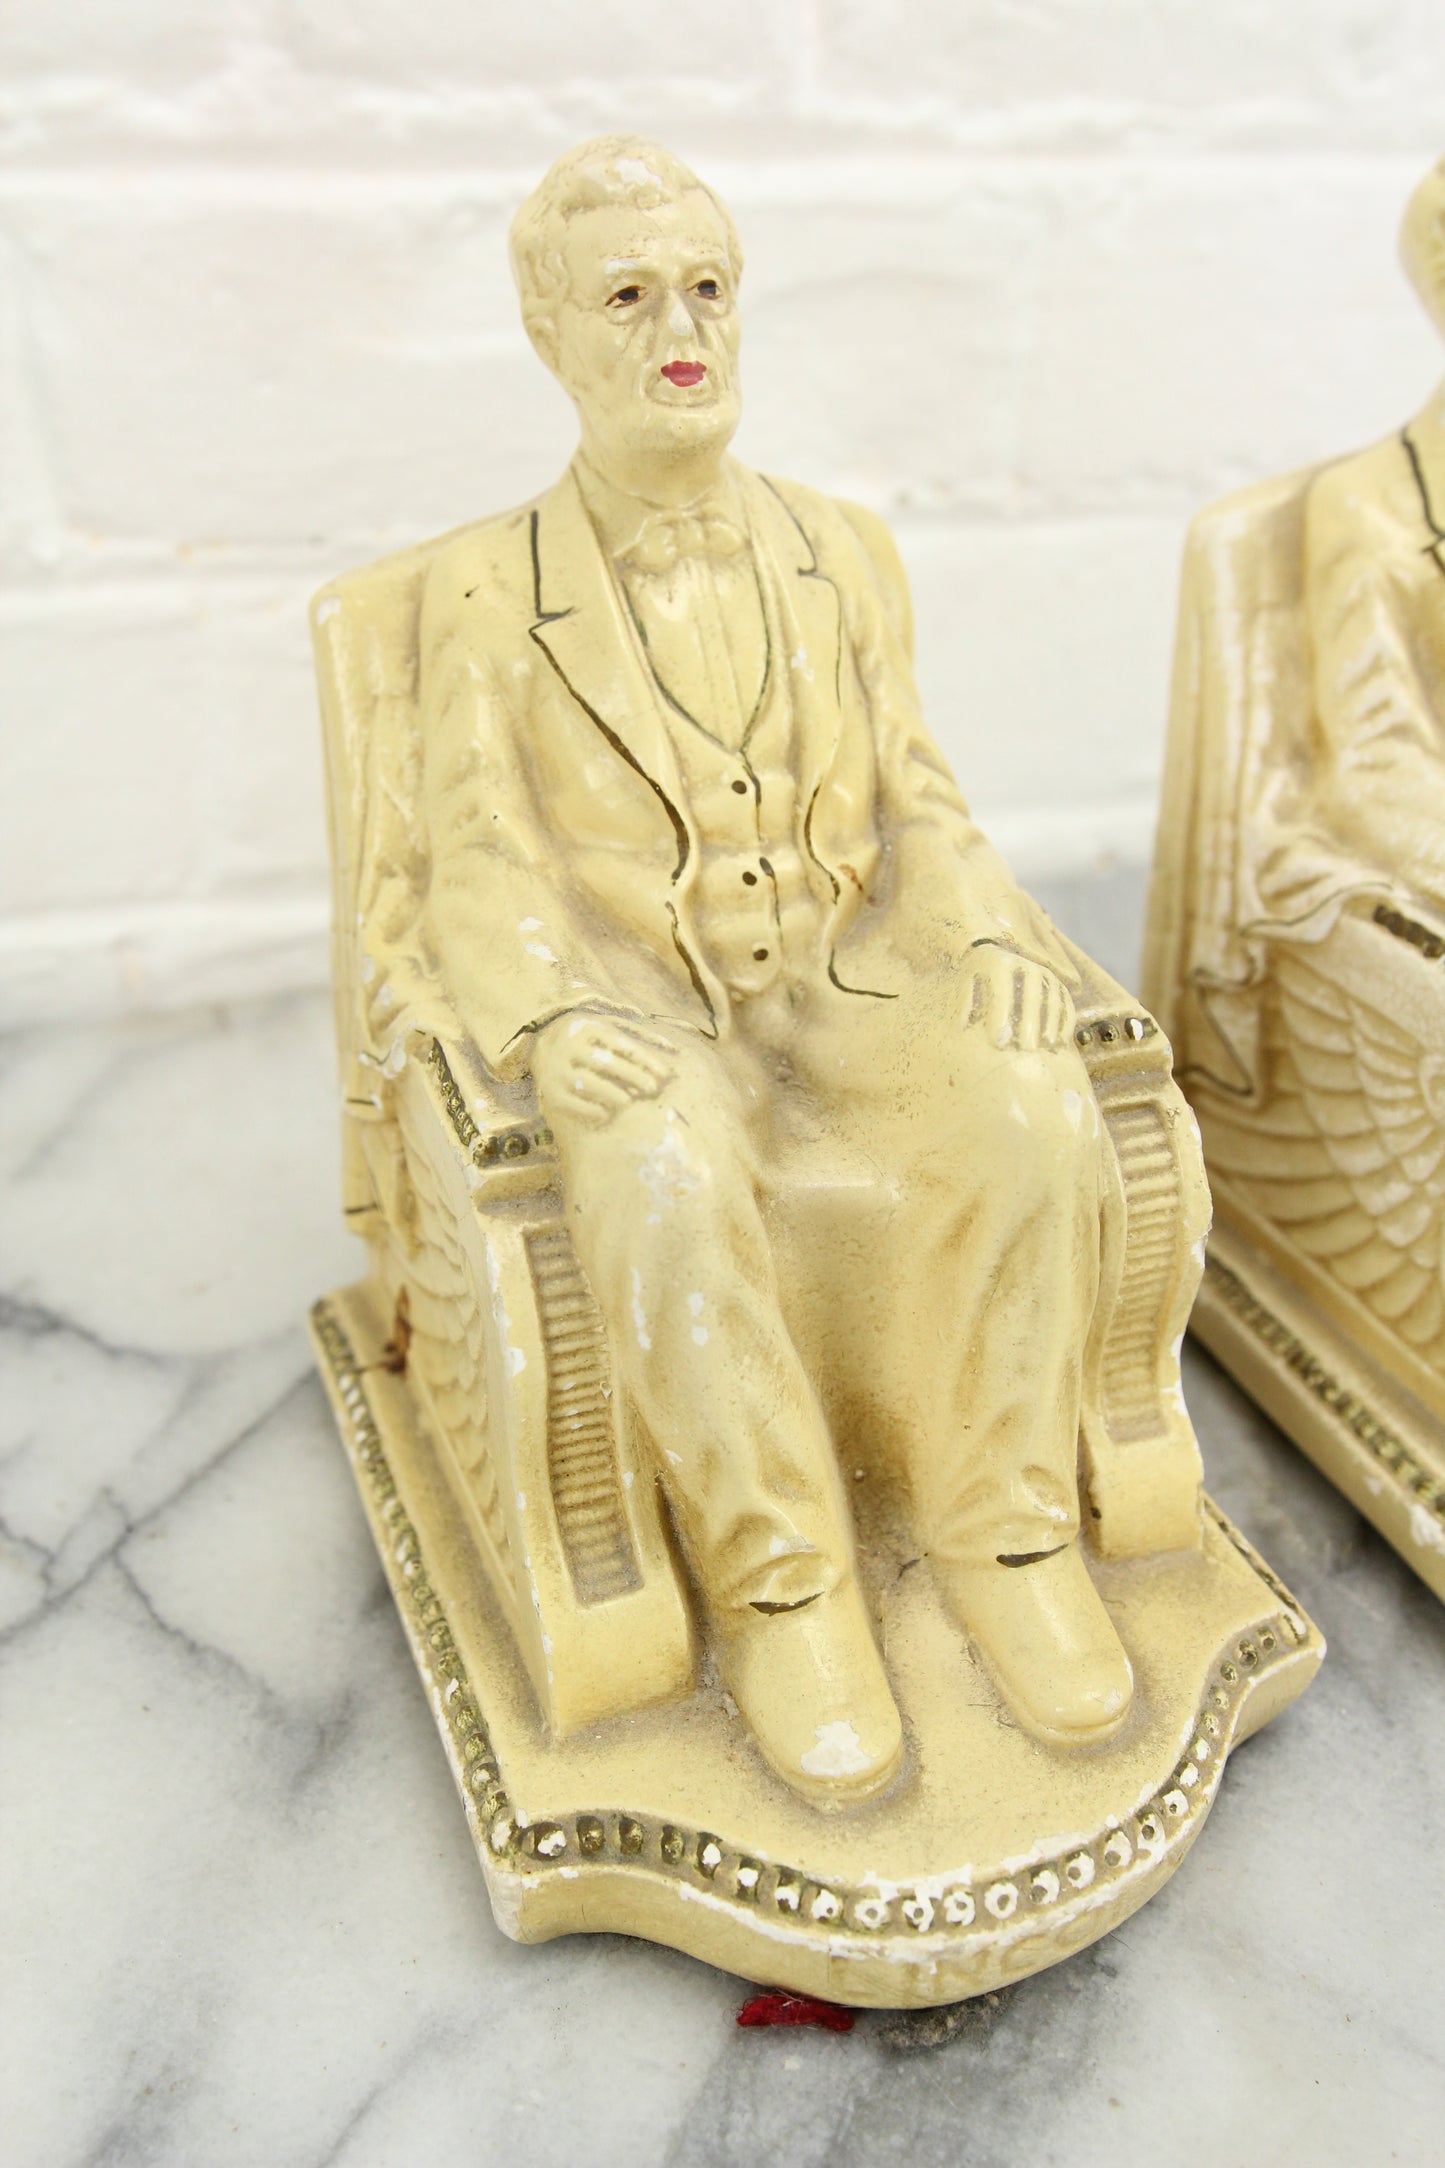 Chalkware Abraham Lincoln Bookends by Roman Art Co. Inc., 1924